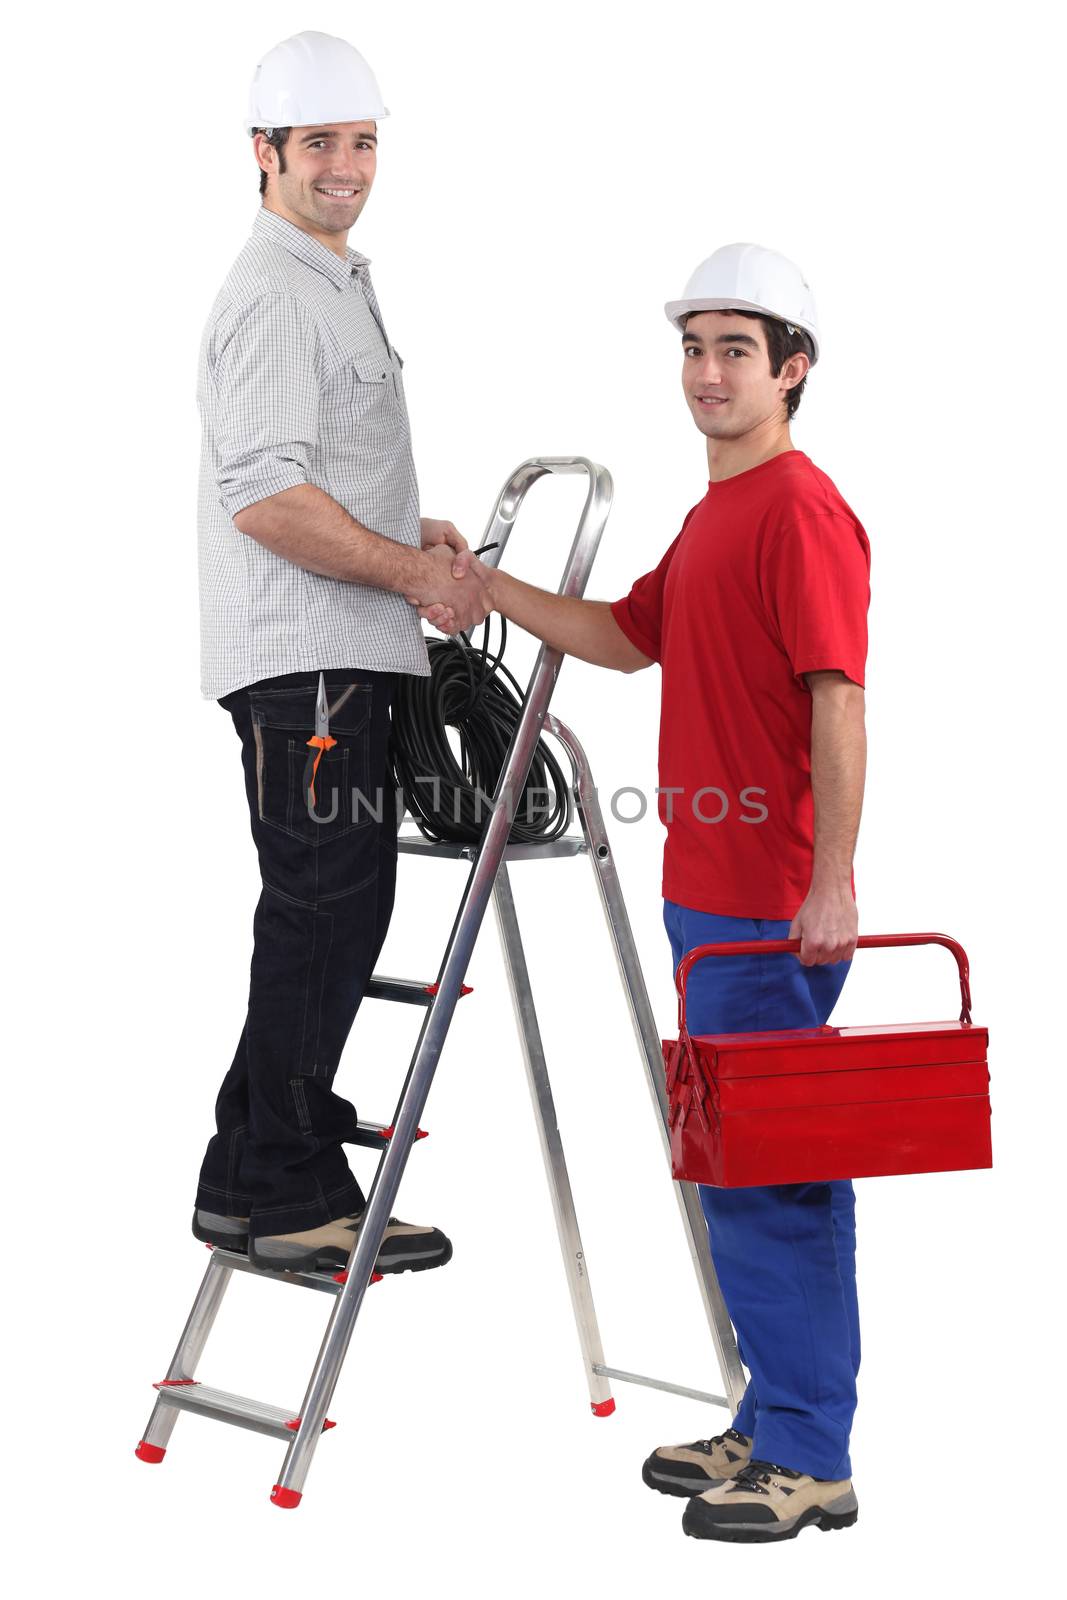 Electricians shaking hands by phovoir